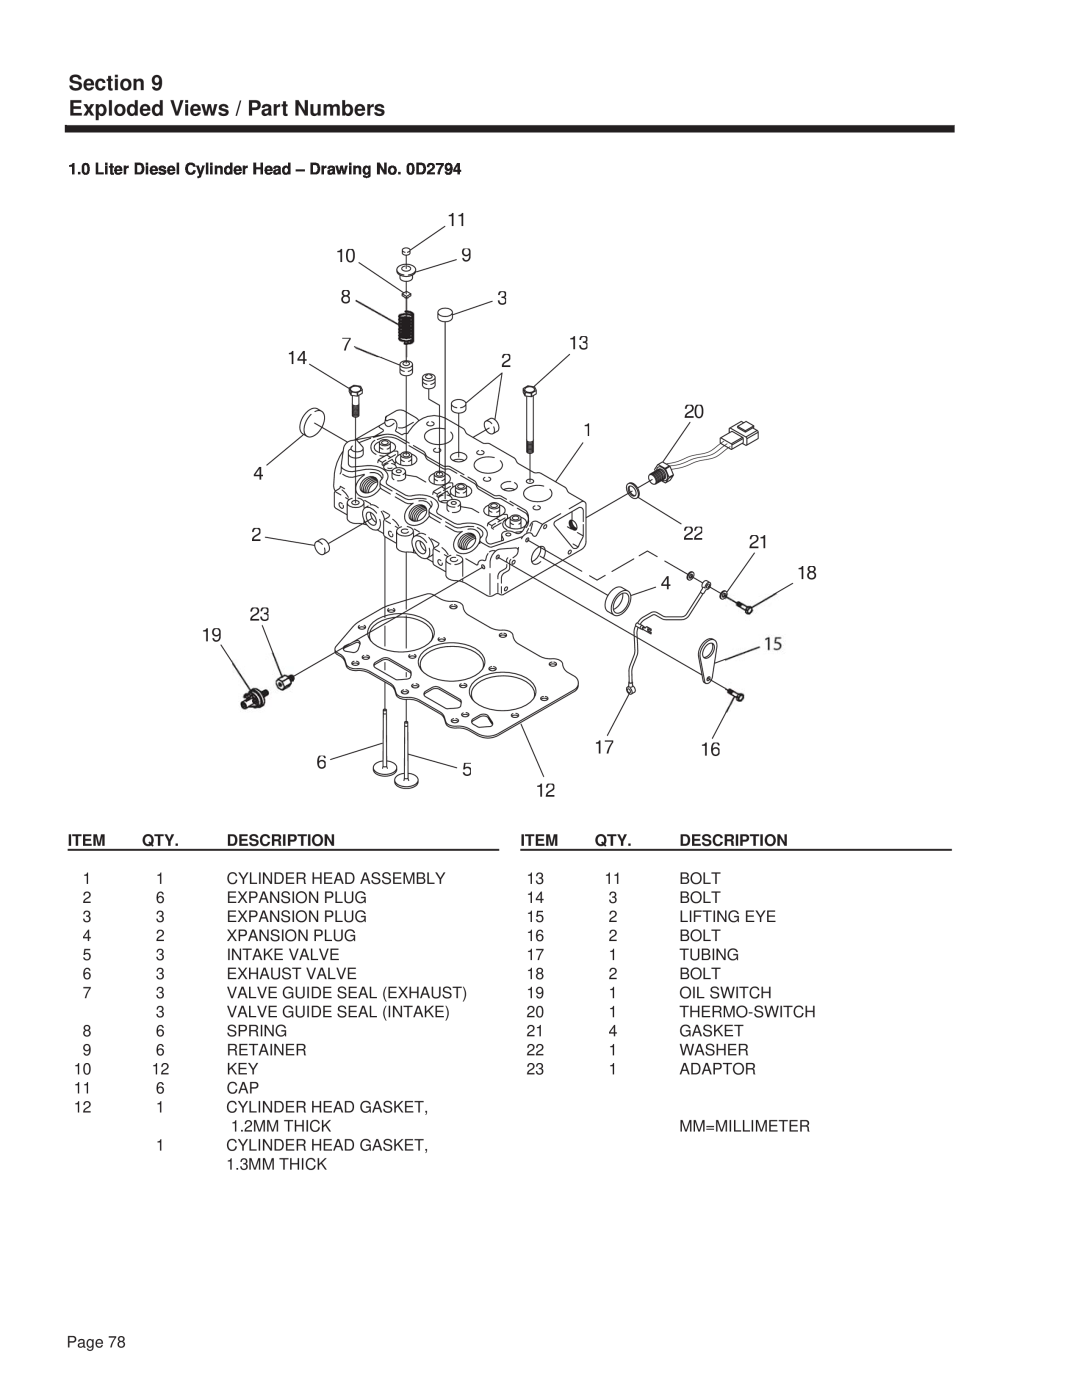 Guardian Technologies 4270 Section Exploded Views / Part Numbers, Liter Diesel Cylinder Head - Drawing No. 0D2794, Spring 